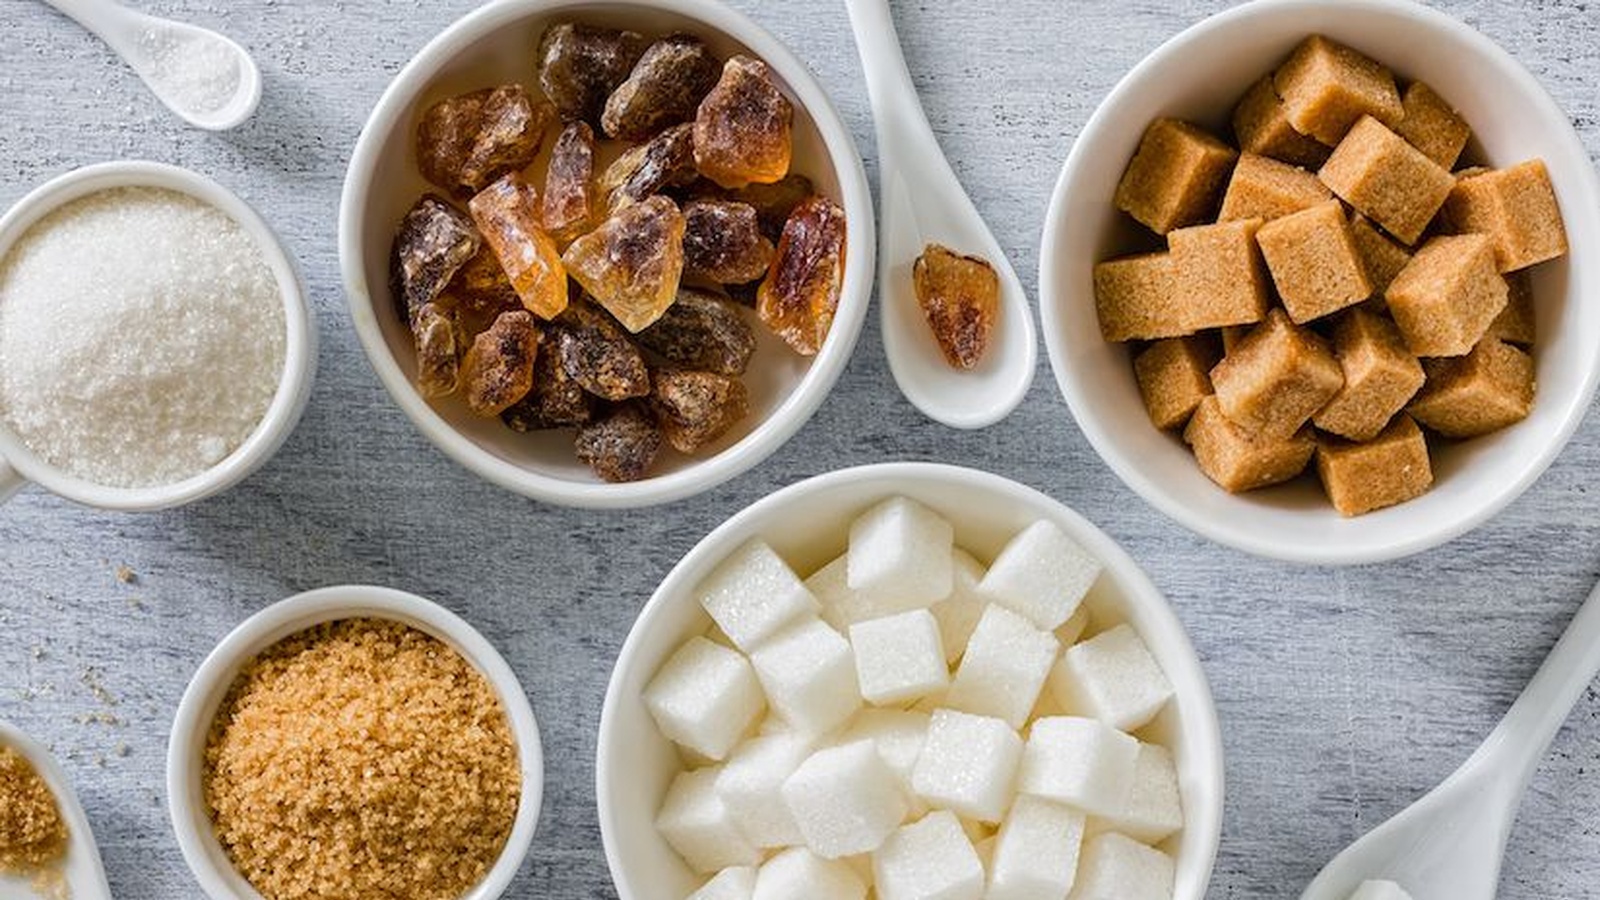 5 (More) Reasons to Quit Sugar